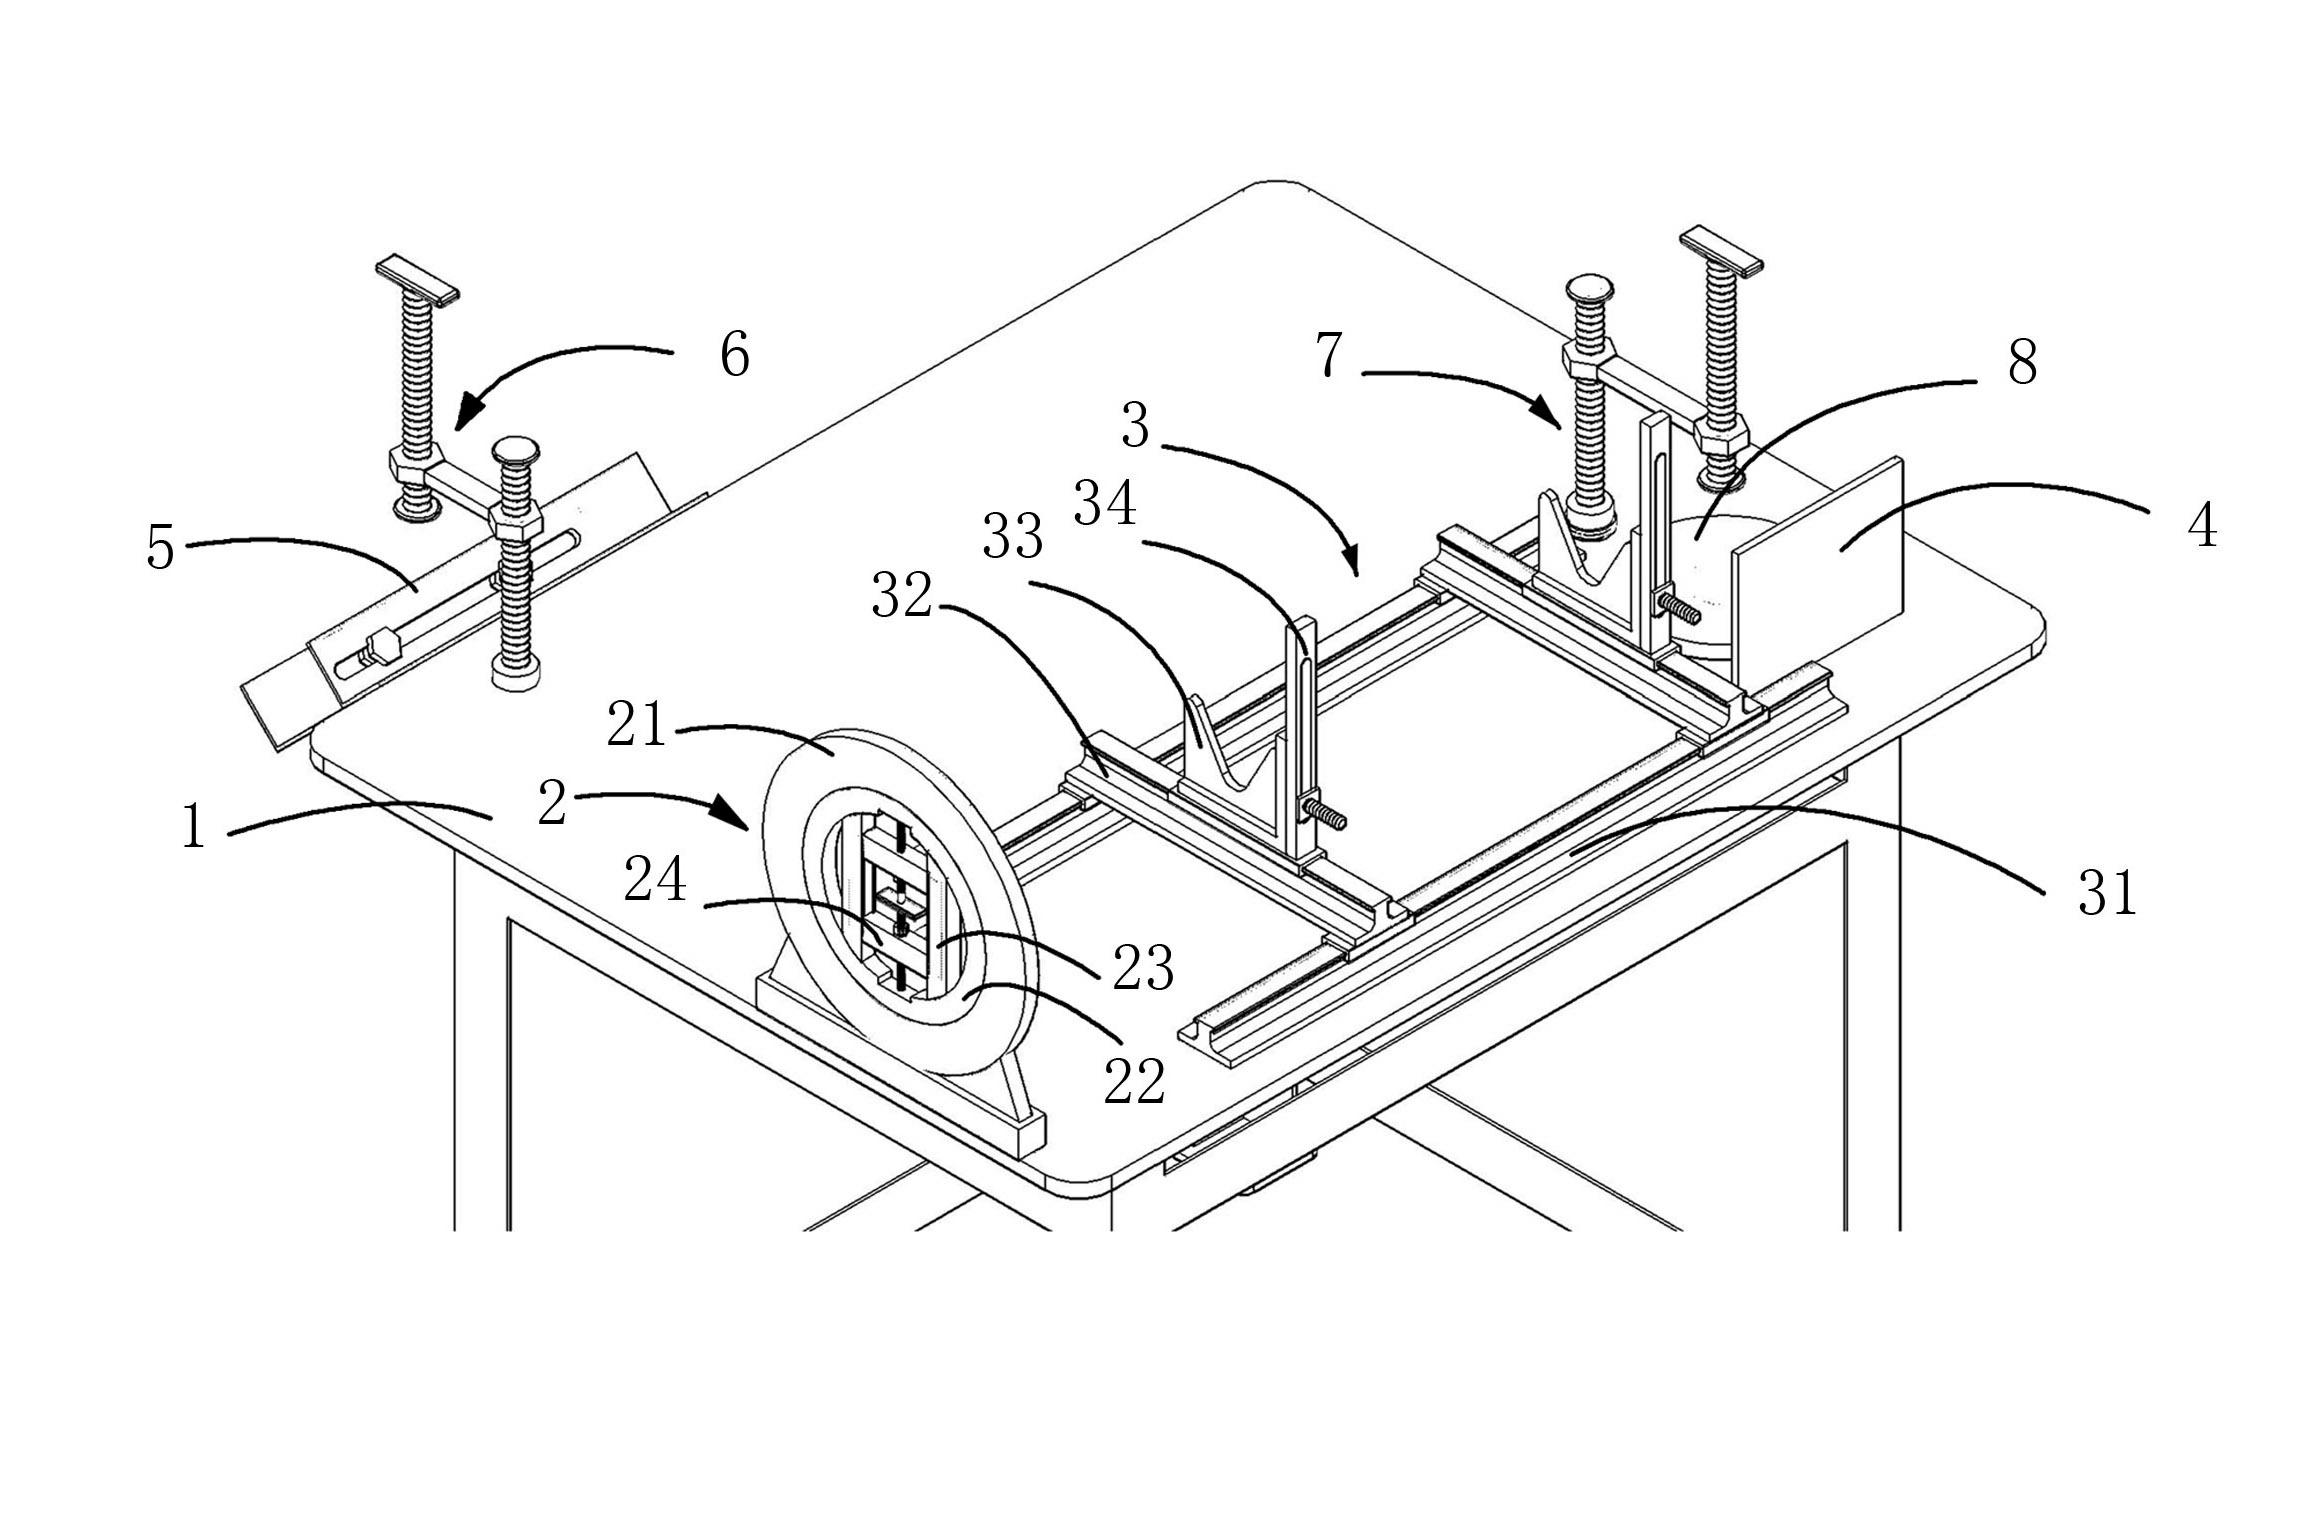 Assembling and welding platform for pipelines